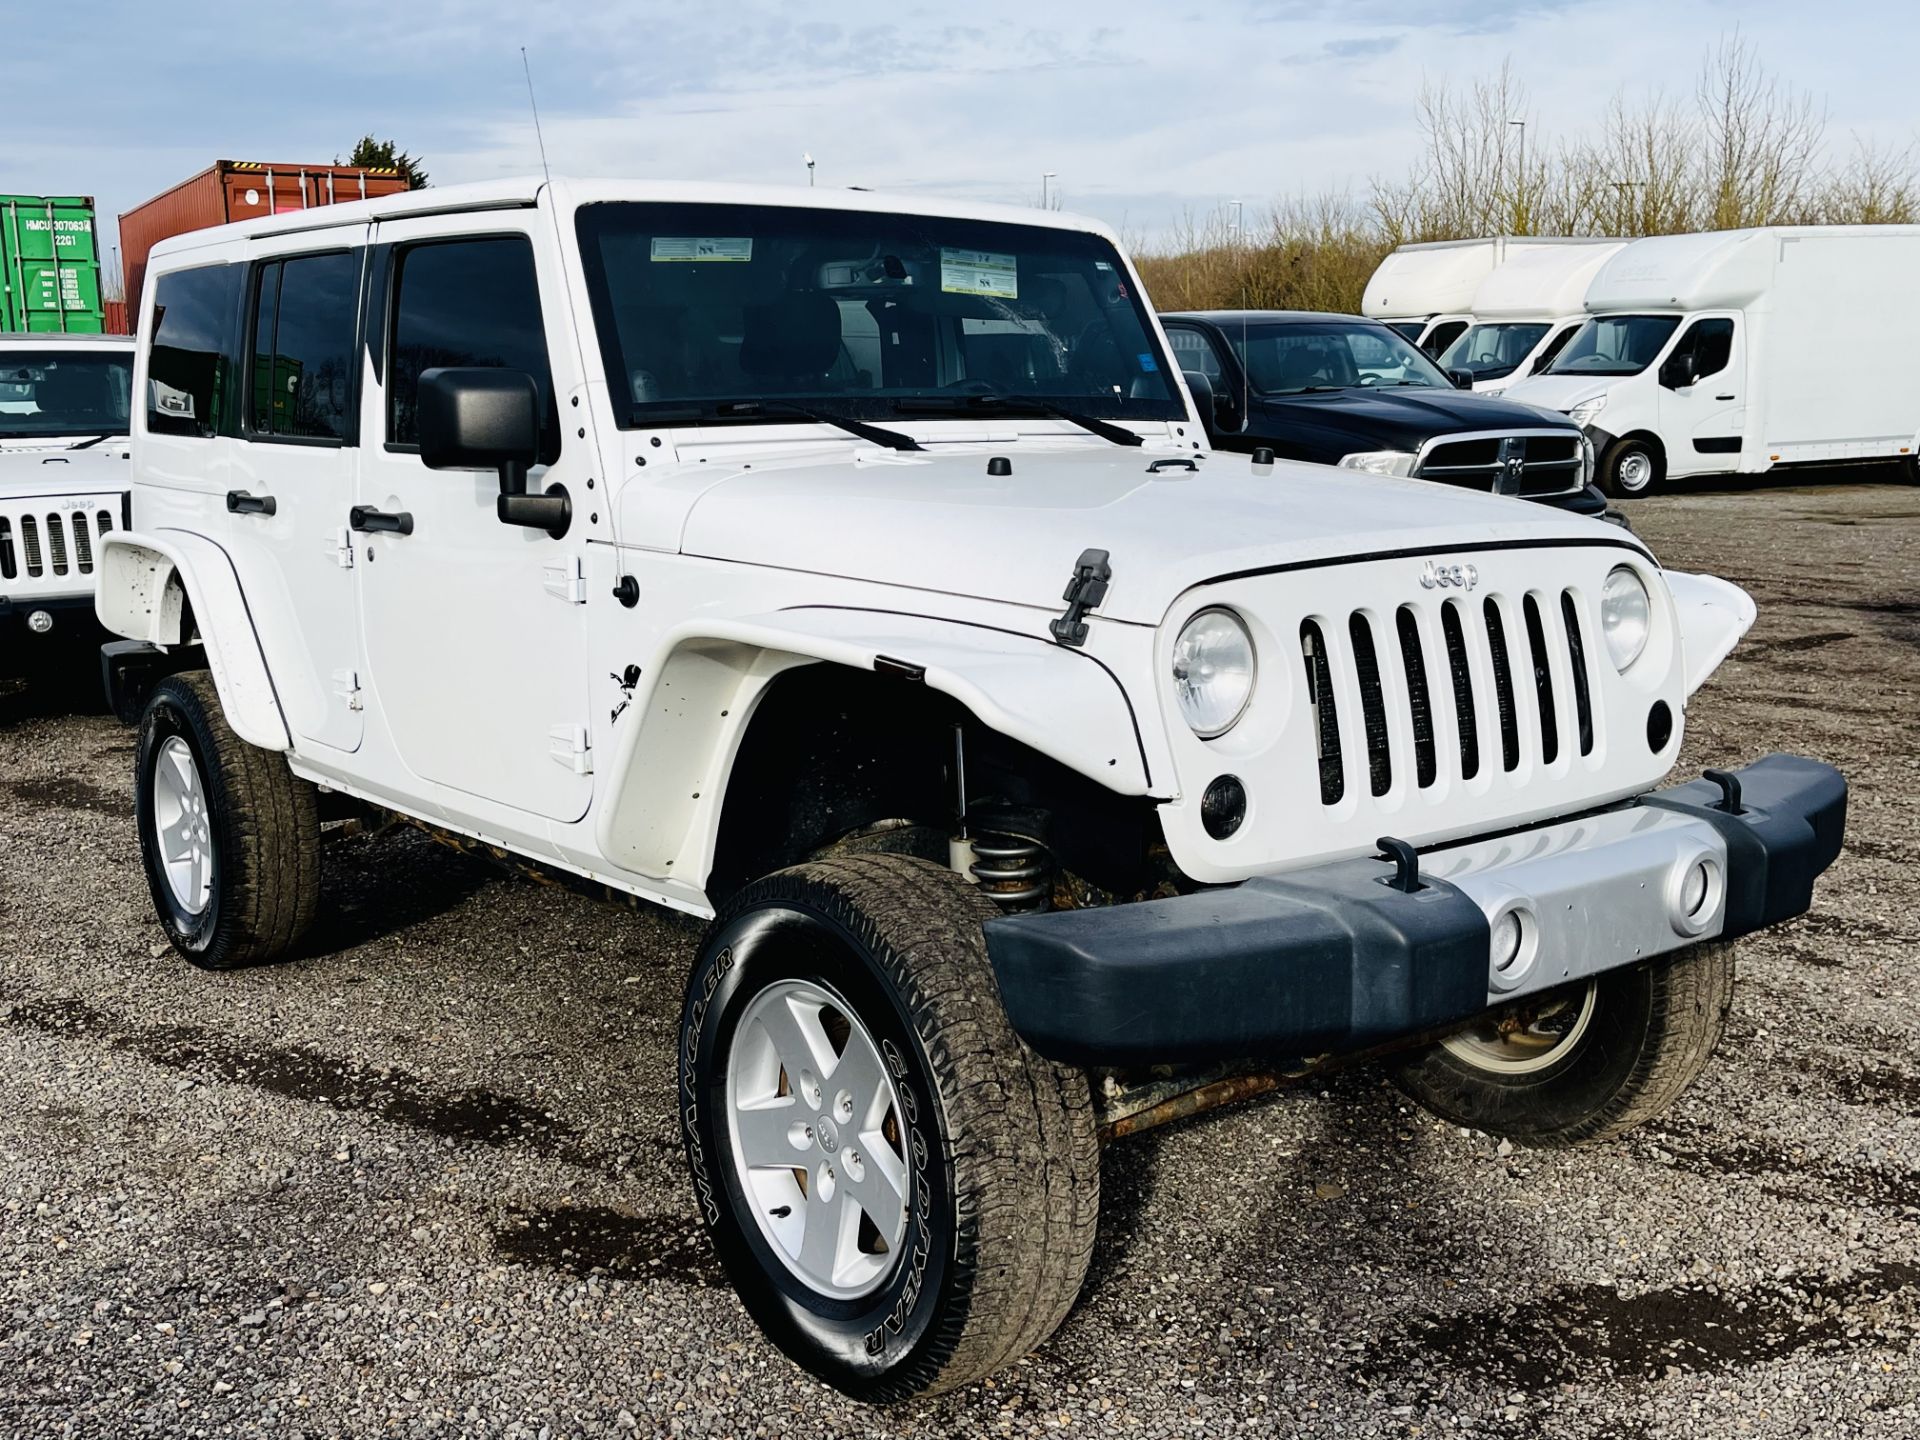 **ON SALE ** Jeep Wrangler 3.6L V6 Unlimited Sahara 4WD Convertible HardTop '2014 Year' - A/C - Image 2 of 24